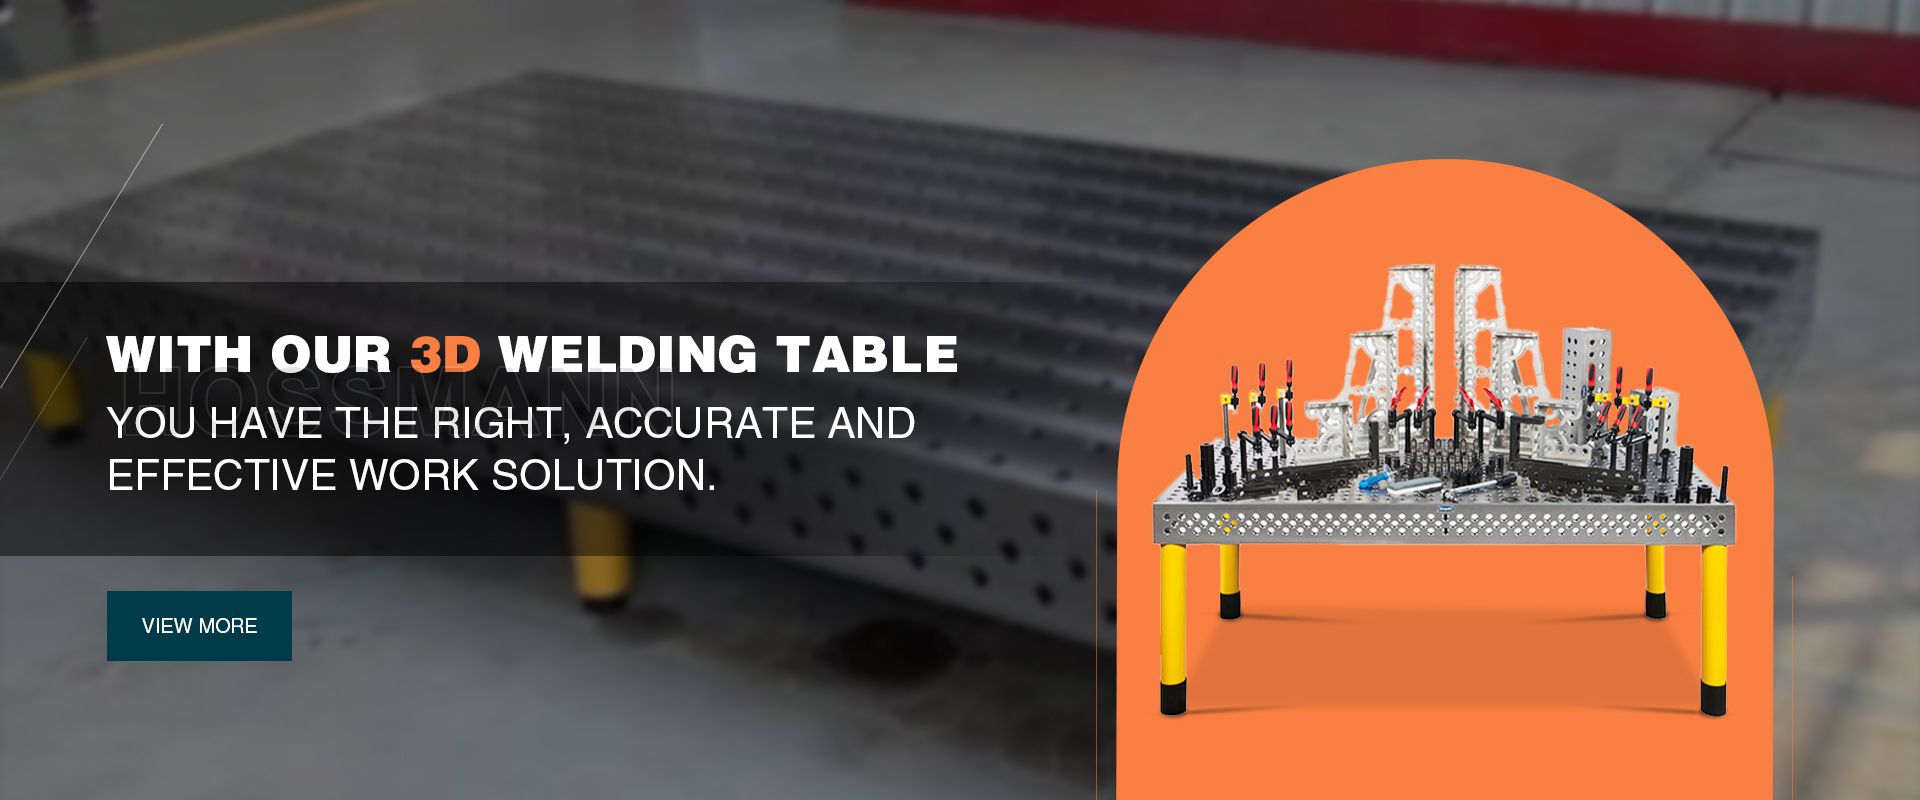 3D Welding Table With Jigs